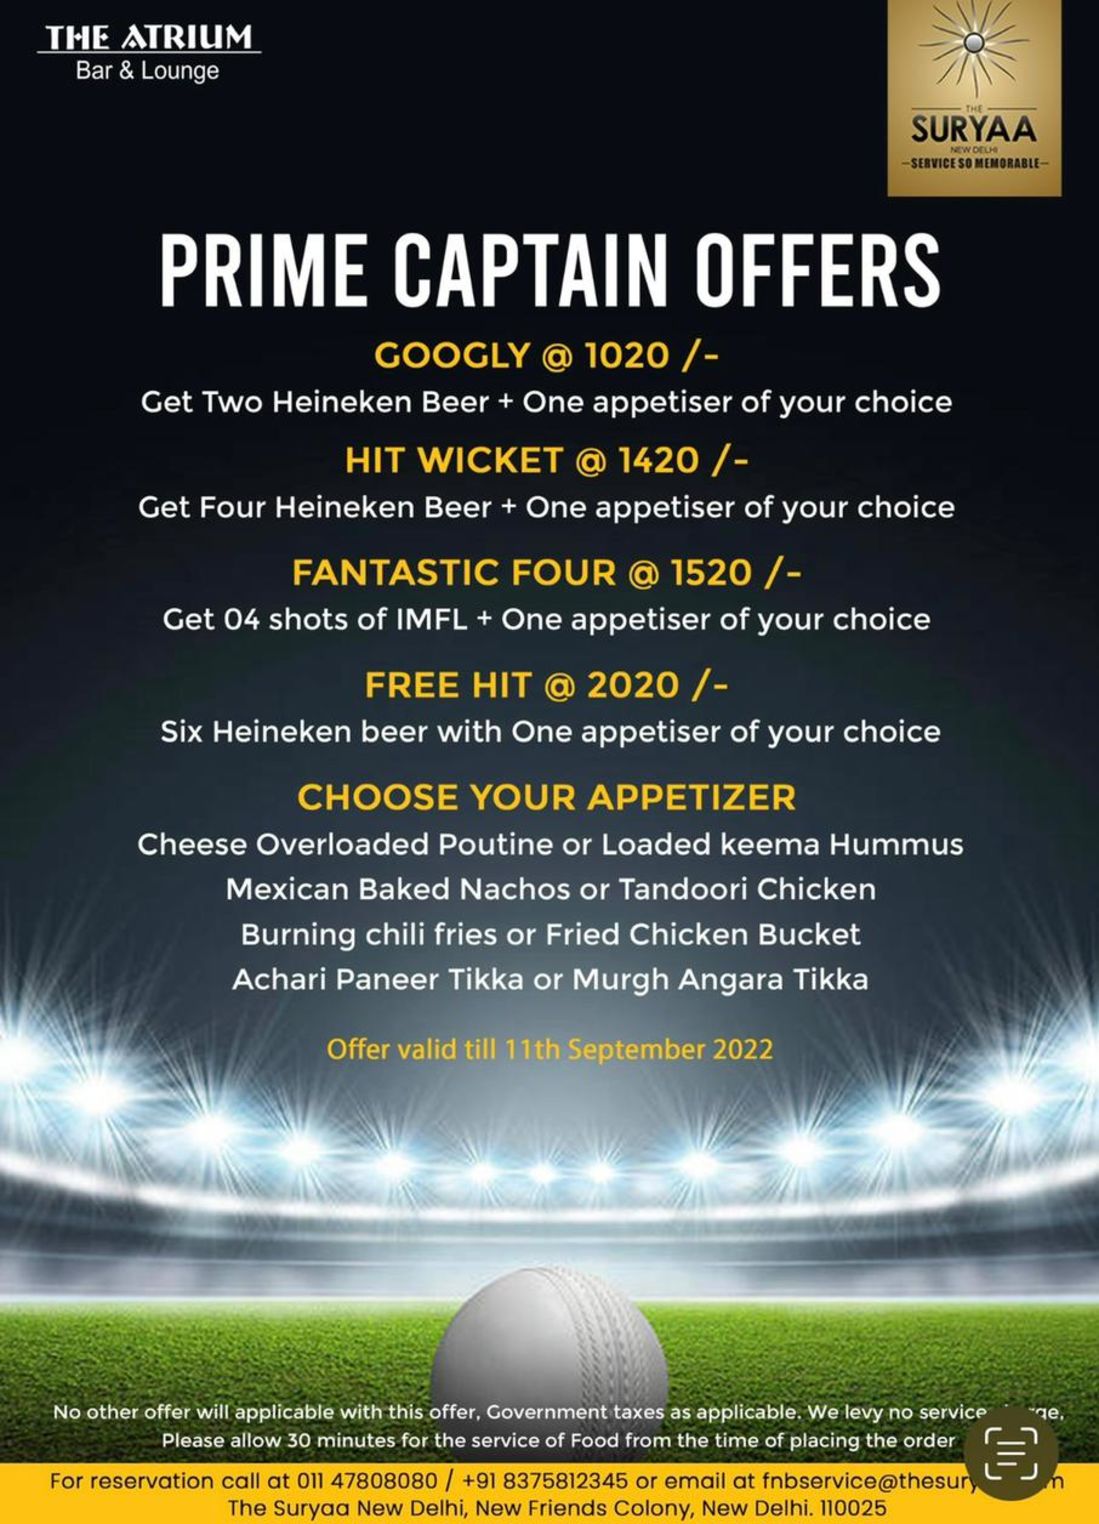 List of Prime Captain Offers